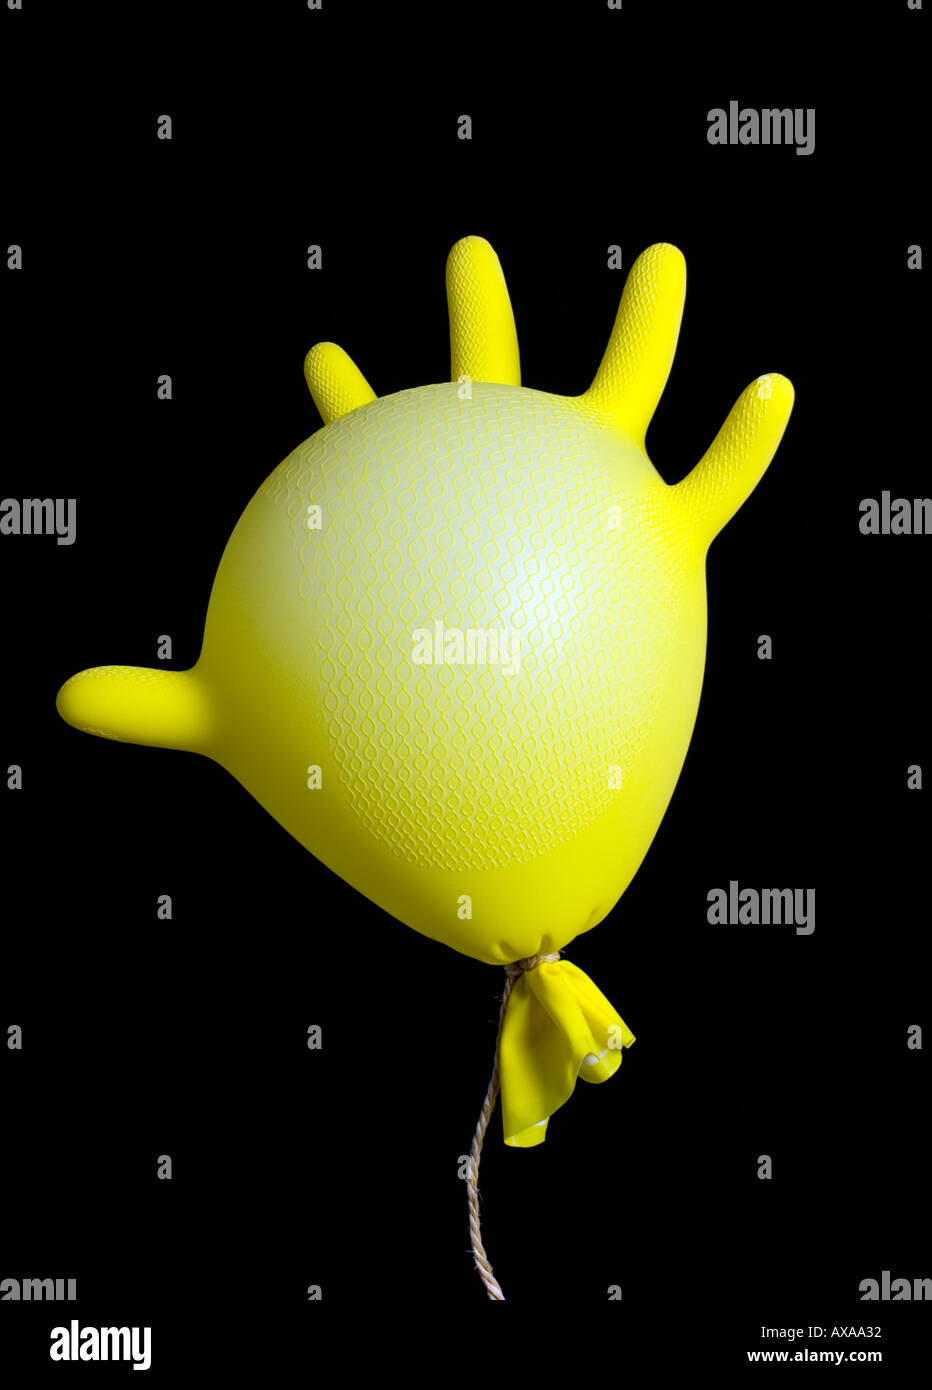 inflated yellow rubber glove Stock Photo